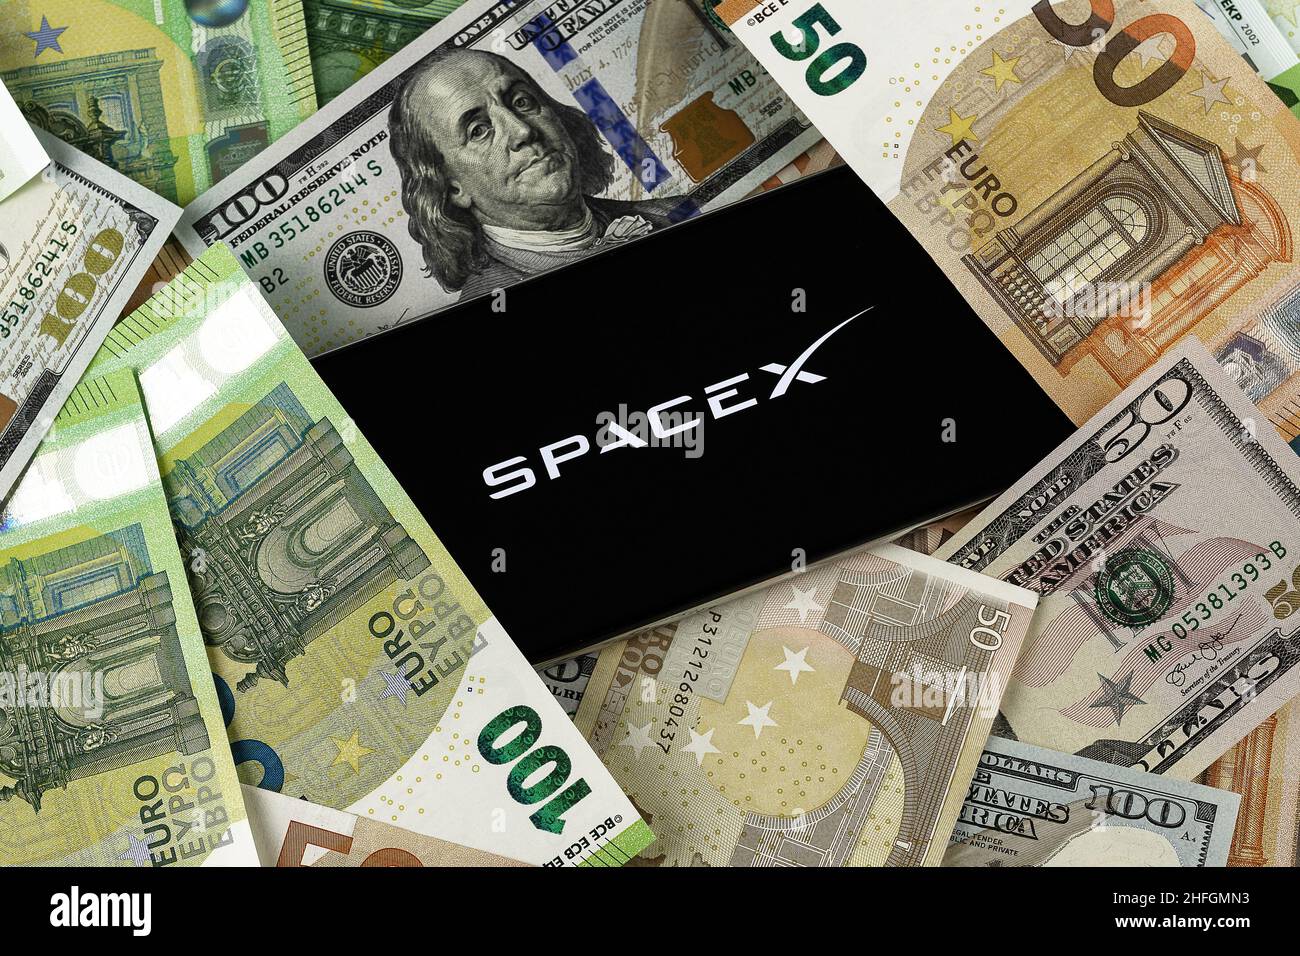 SpaceX editorial. Illustrative photo for news about SpaceX - an aerospace manufacturer and space transportation services company Stock Photo